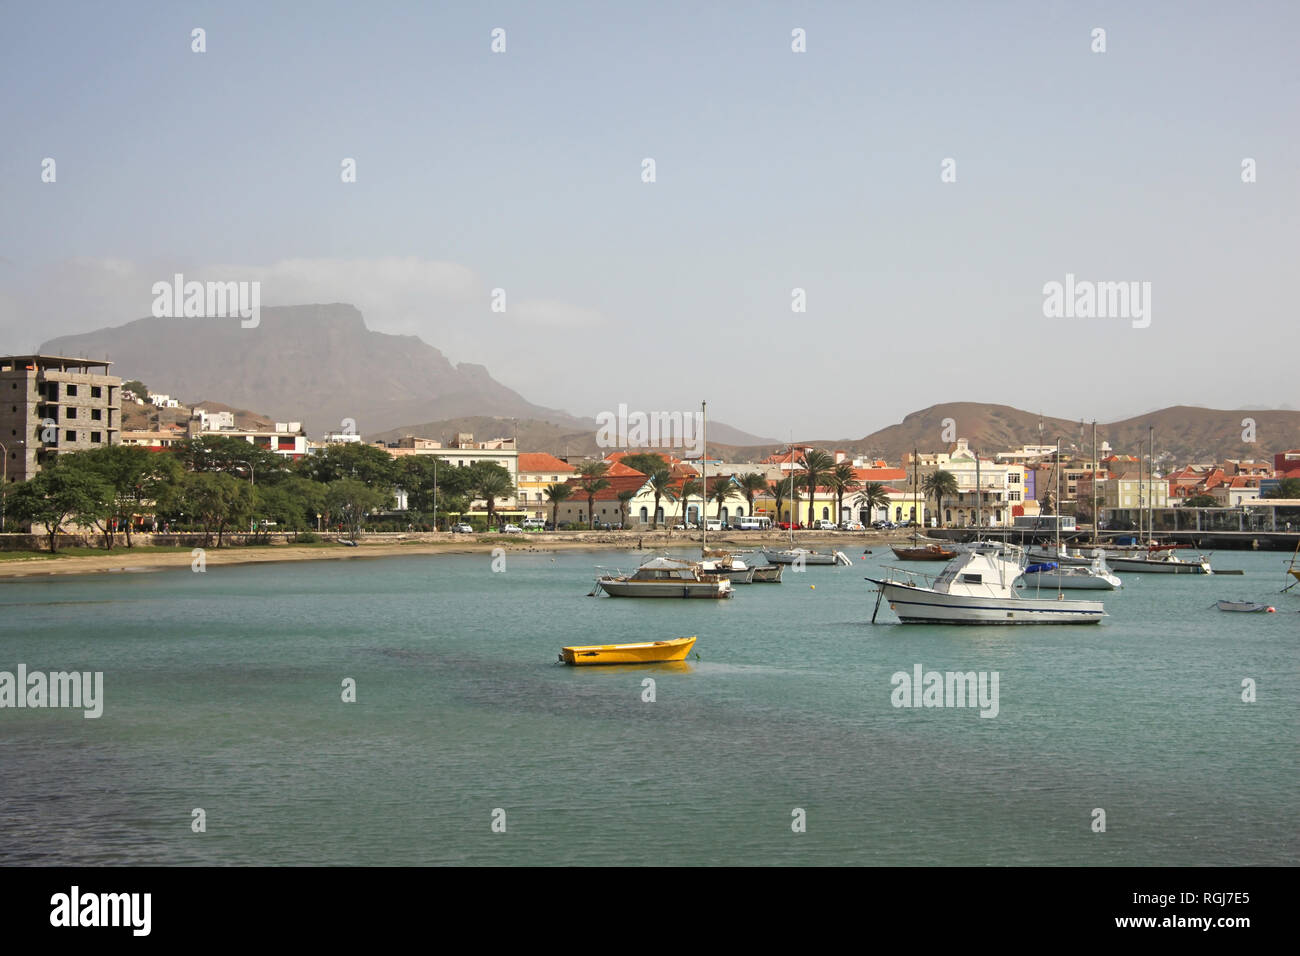 Harbor with fishing boats & the water front of Mindelo on Sao Vicente Island, Cape Verde Islands. Stock Photo